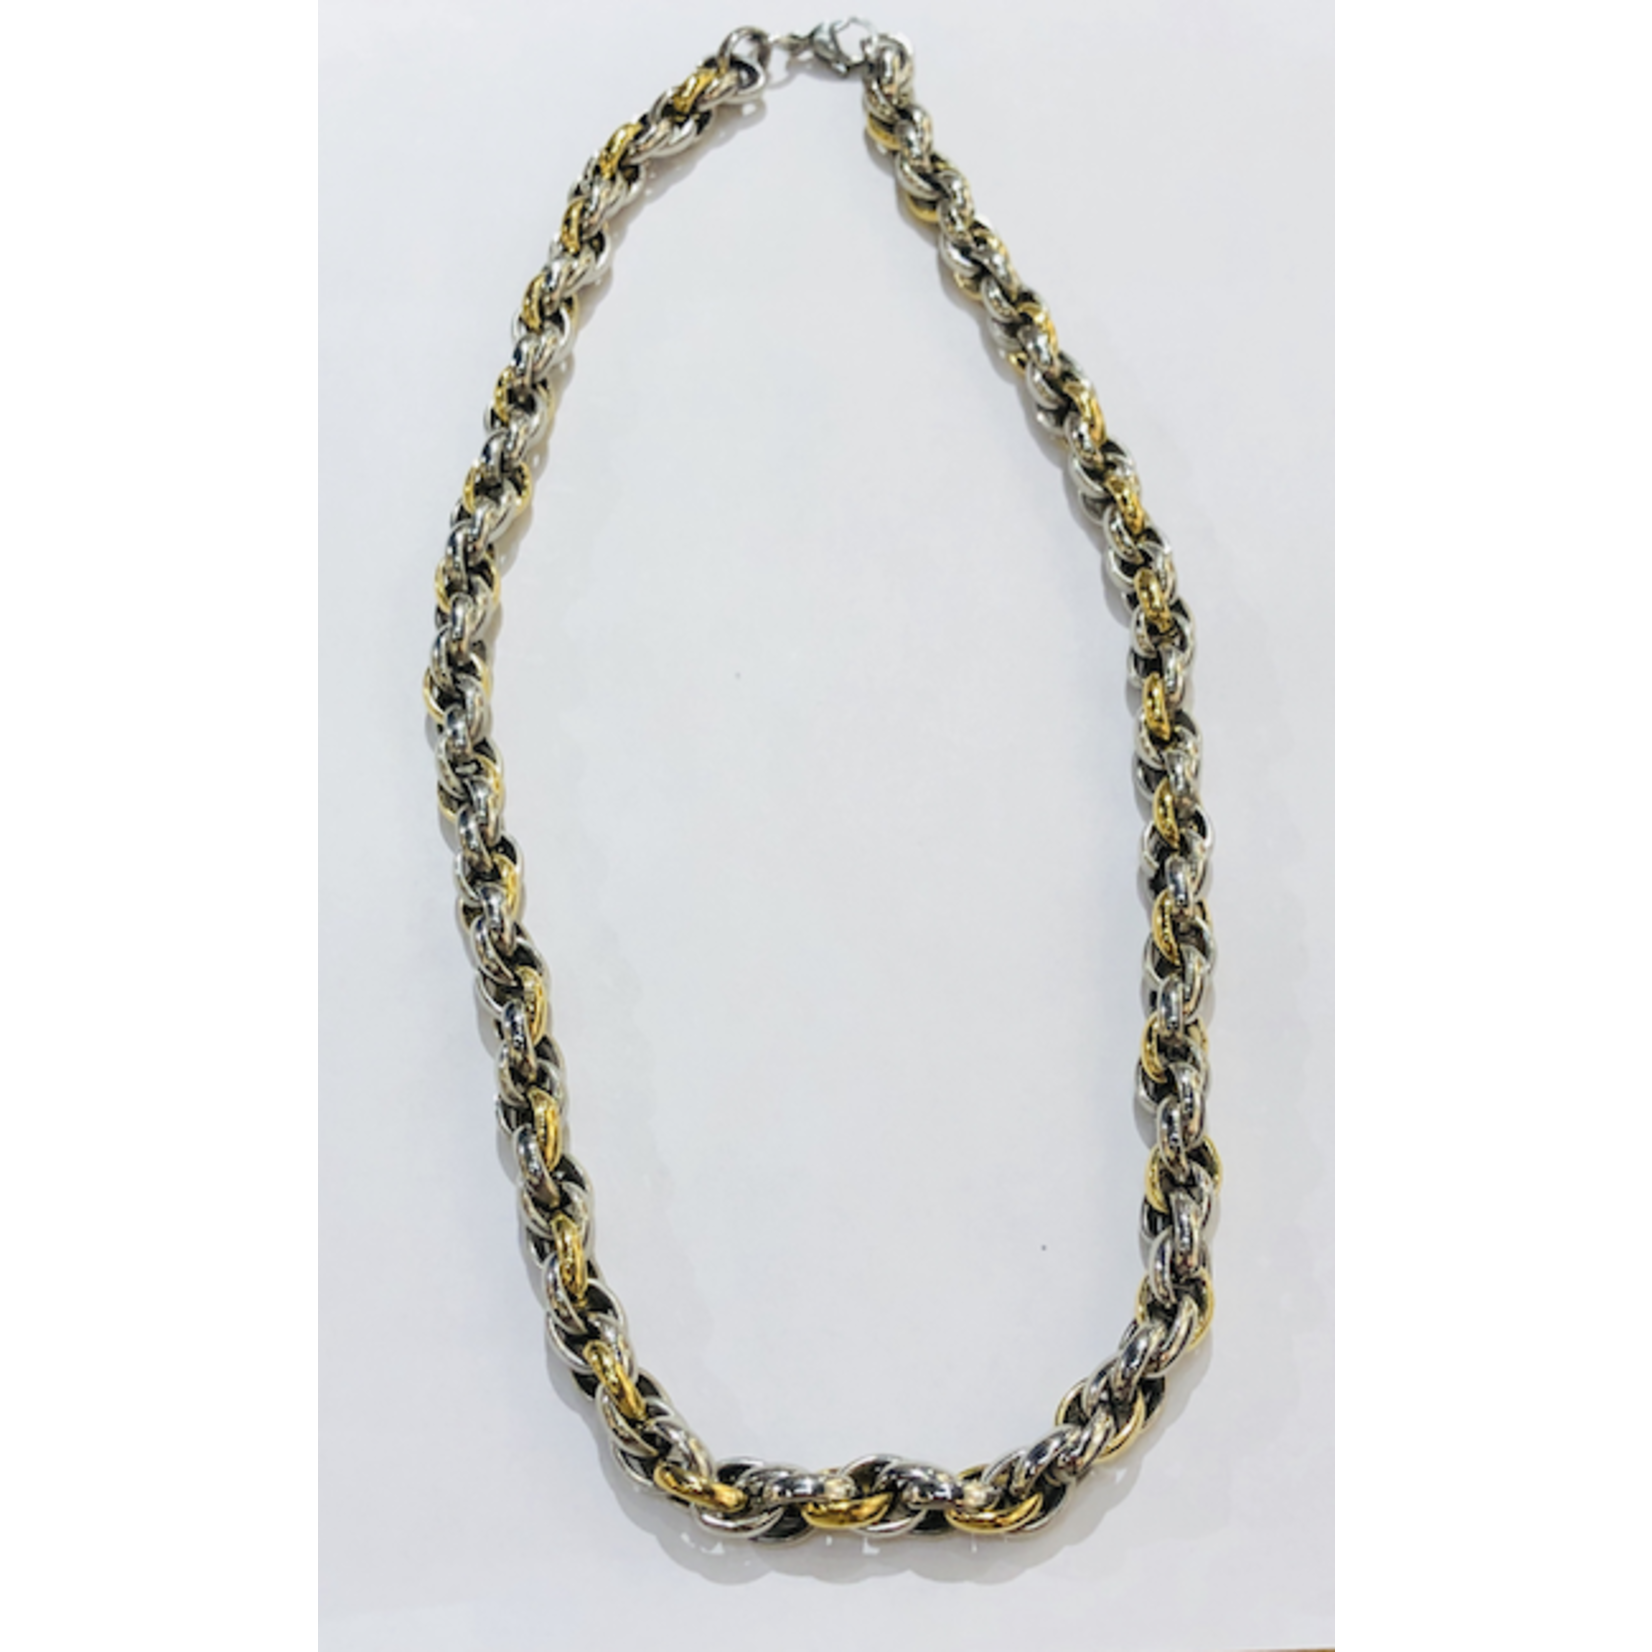 MIXED STAINLESS CHAIN FJNB-22 - Art Gallery H